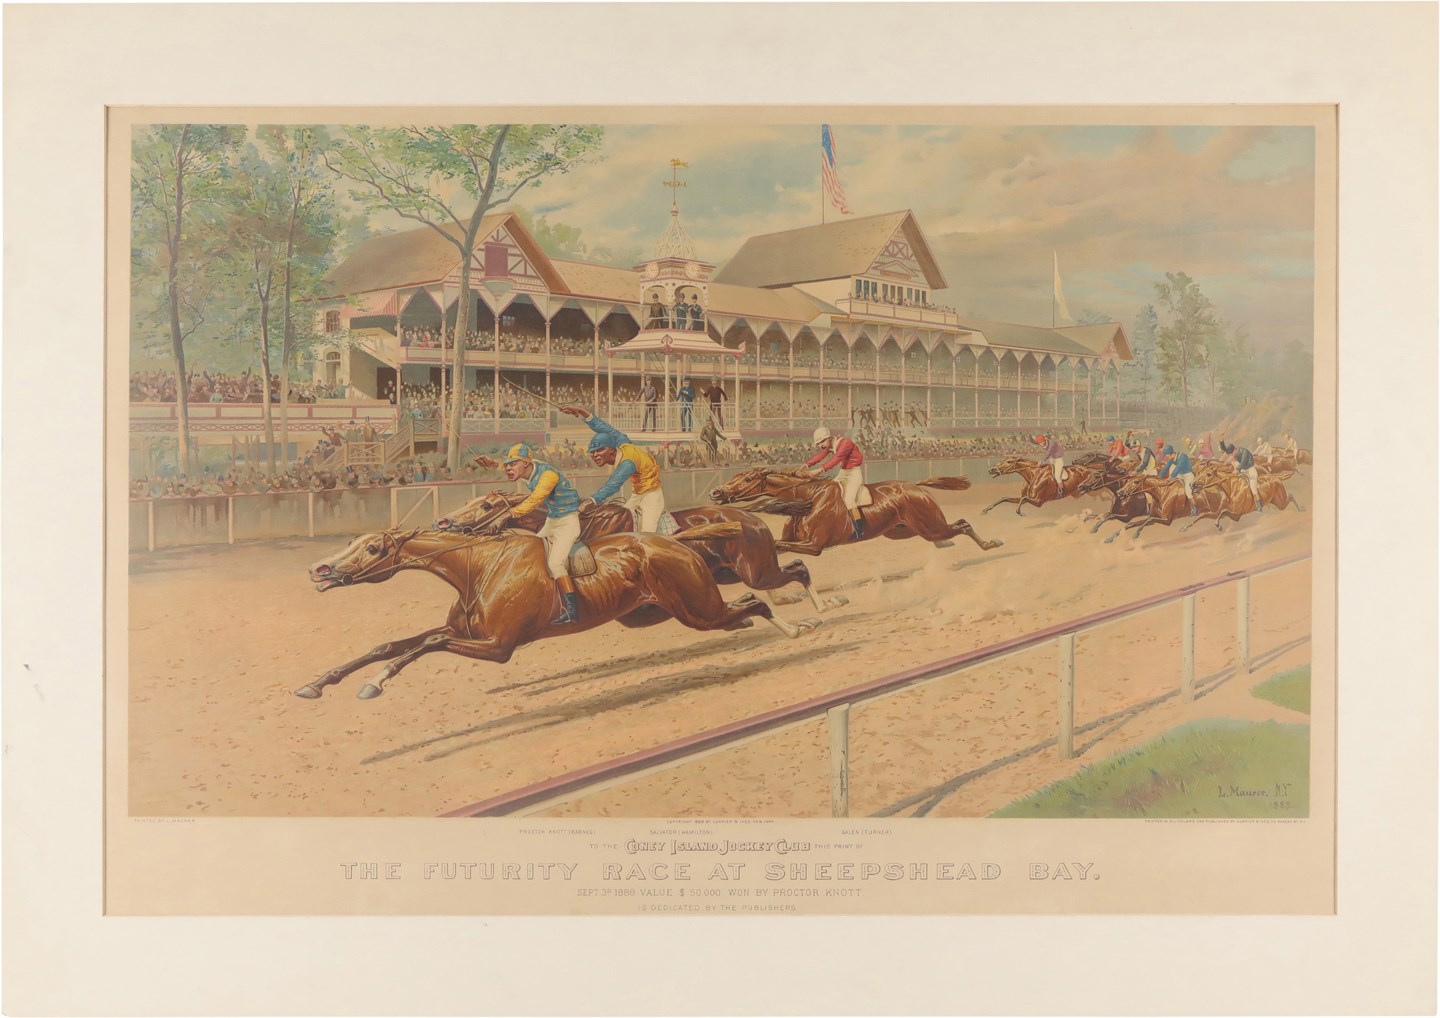 - Outstanding 1888 Currier & Ives Original Print of The Futurity Race at Sheepshead Bay